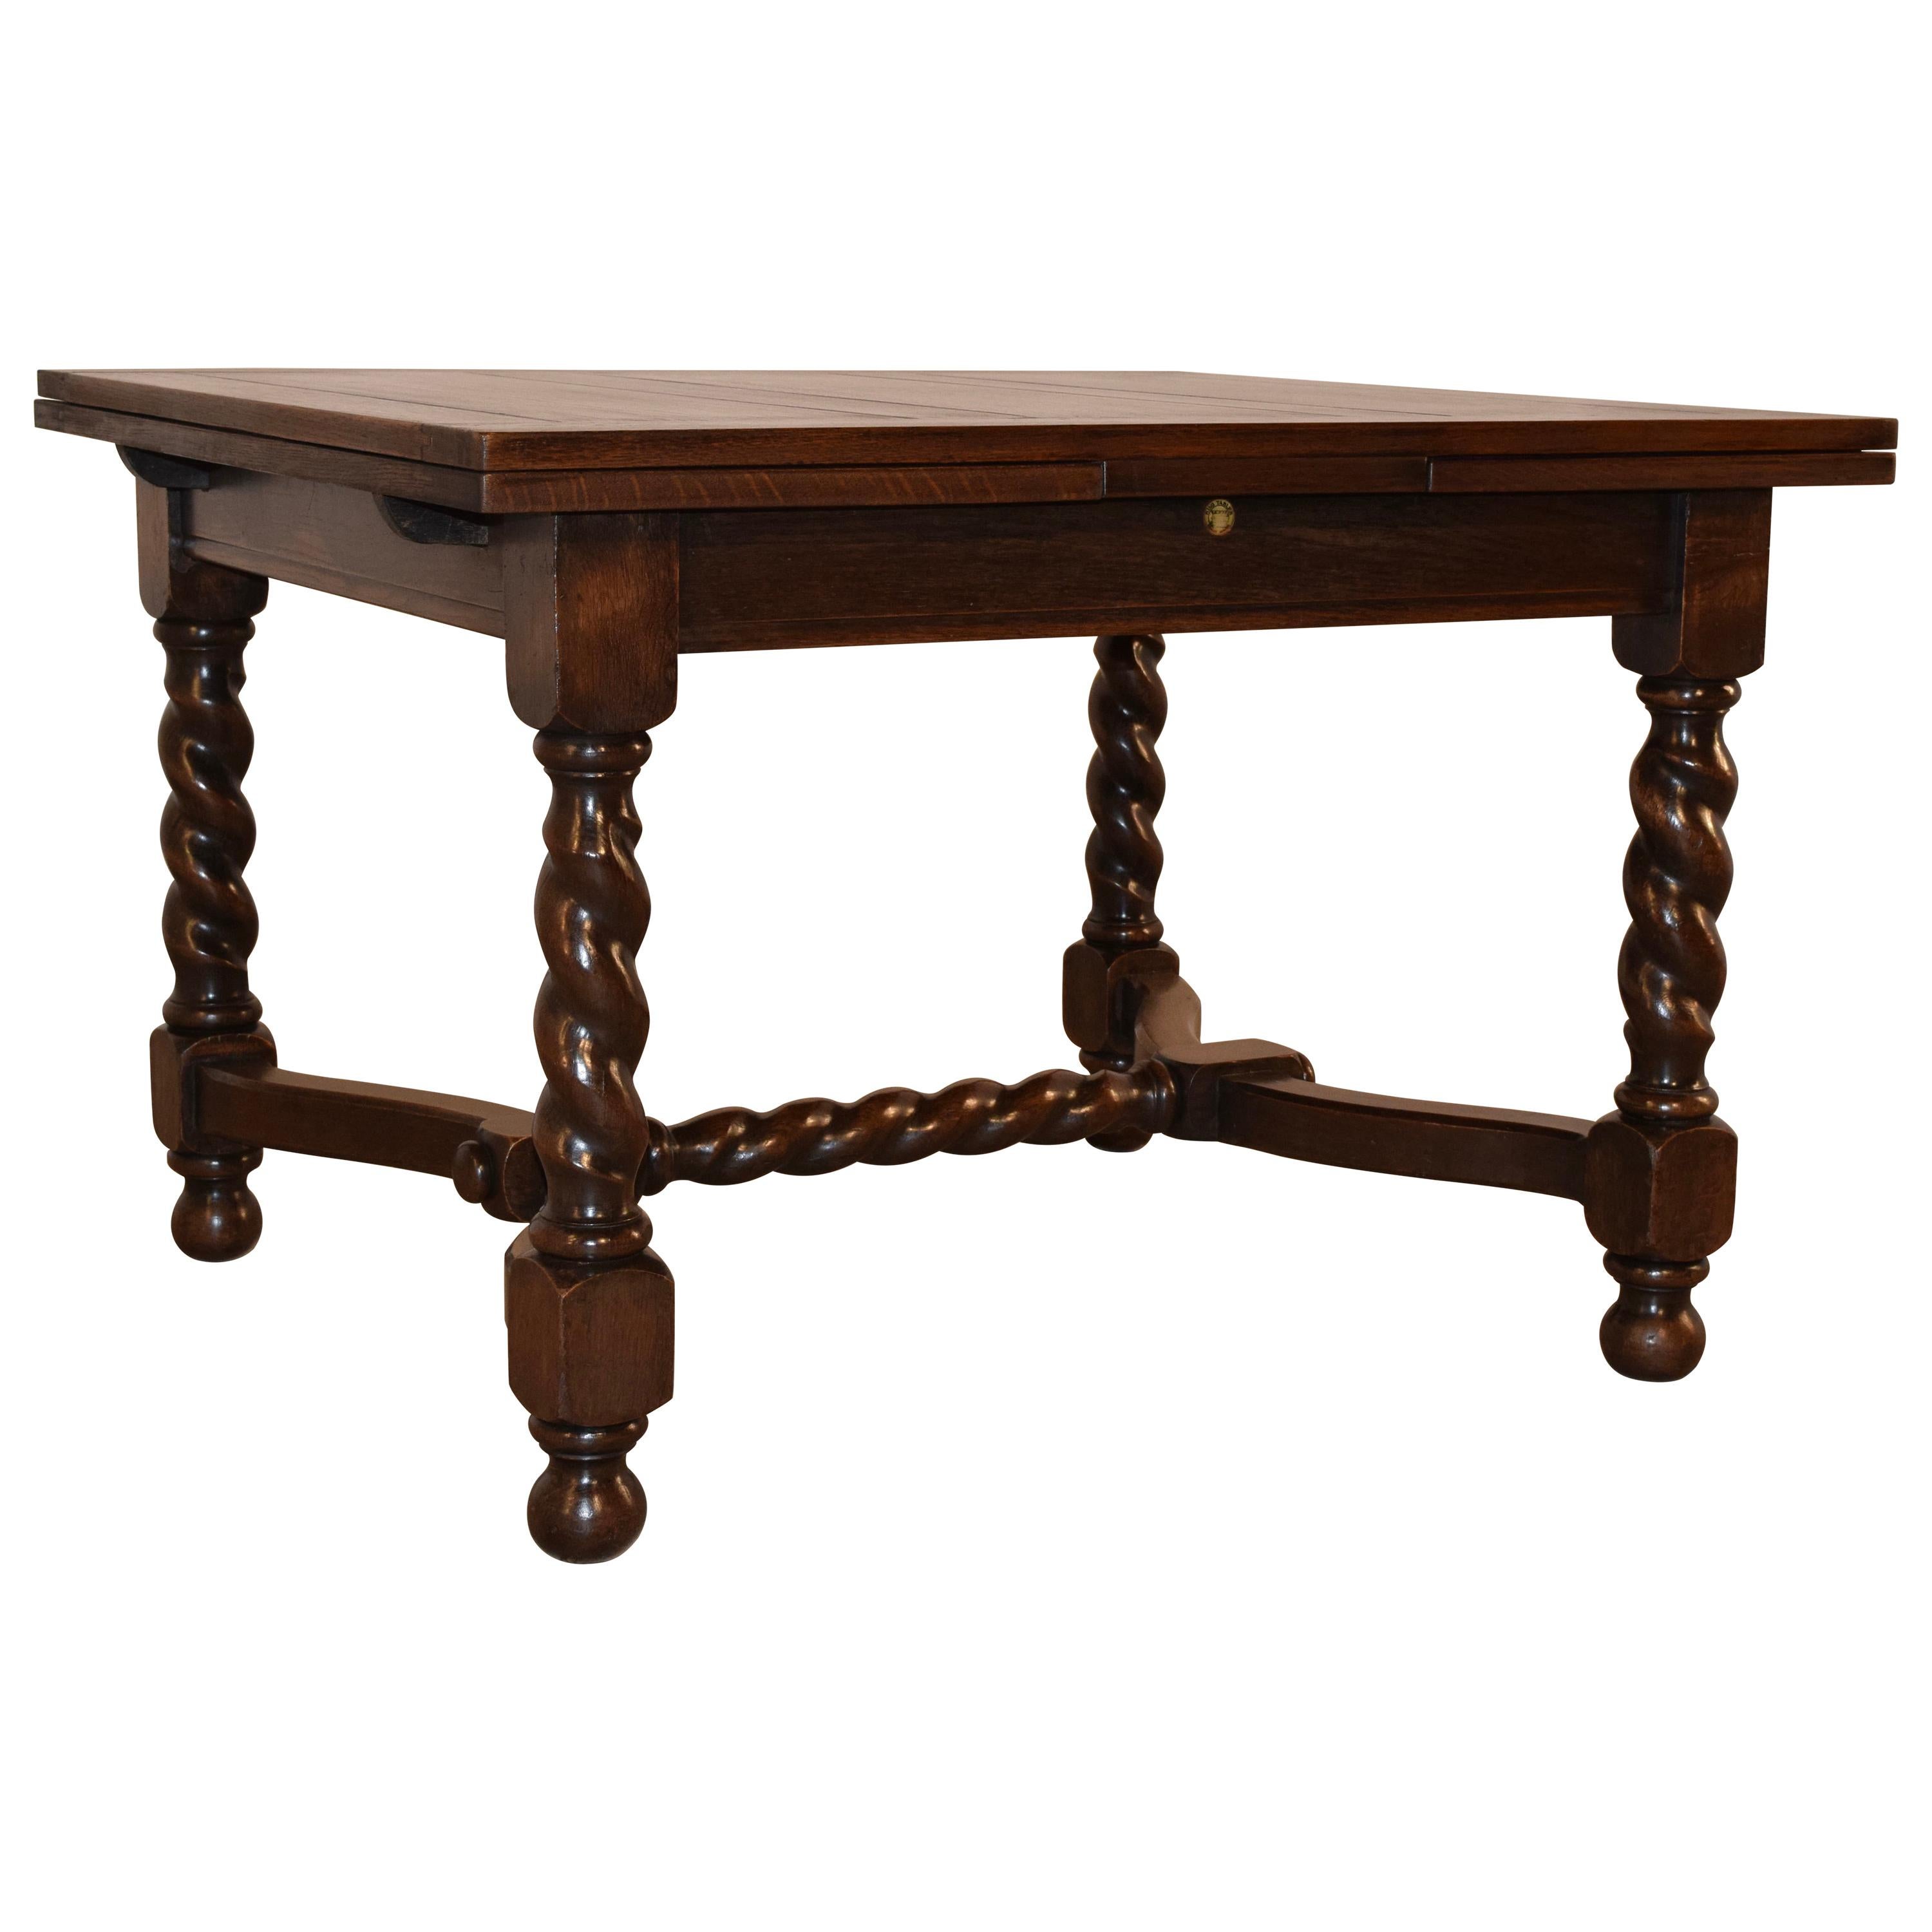 English Oak Table with Draw Leaves, circa 1900